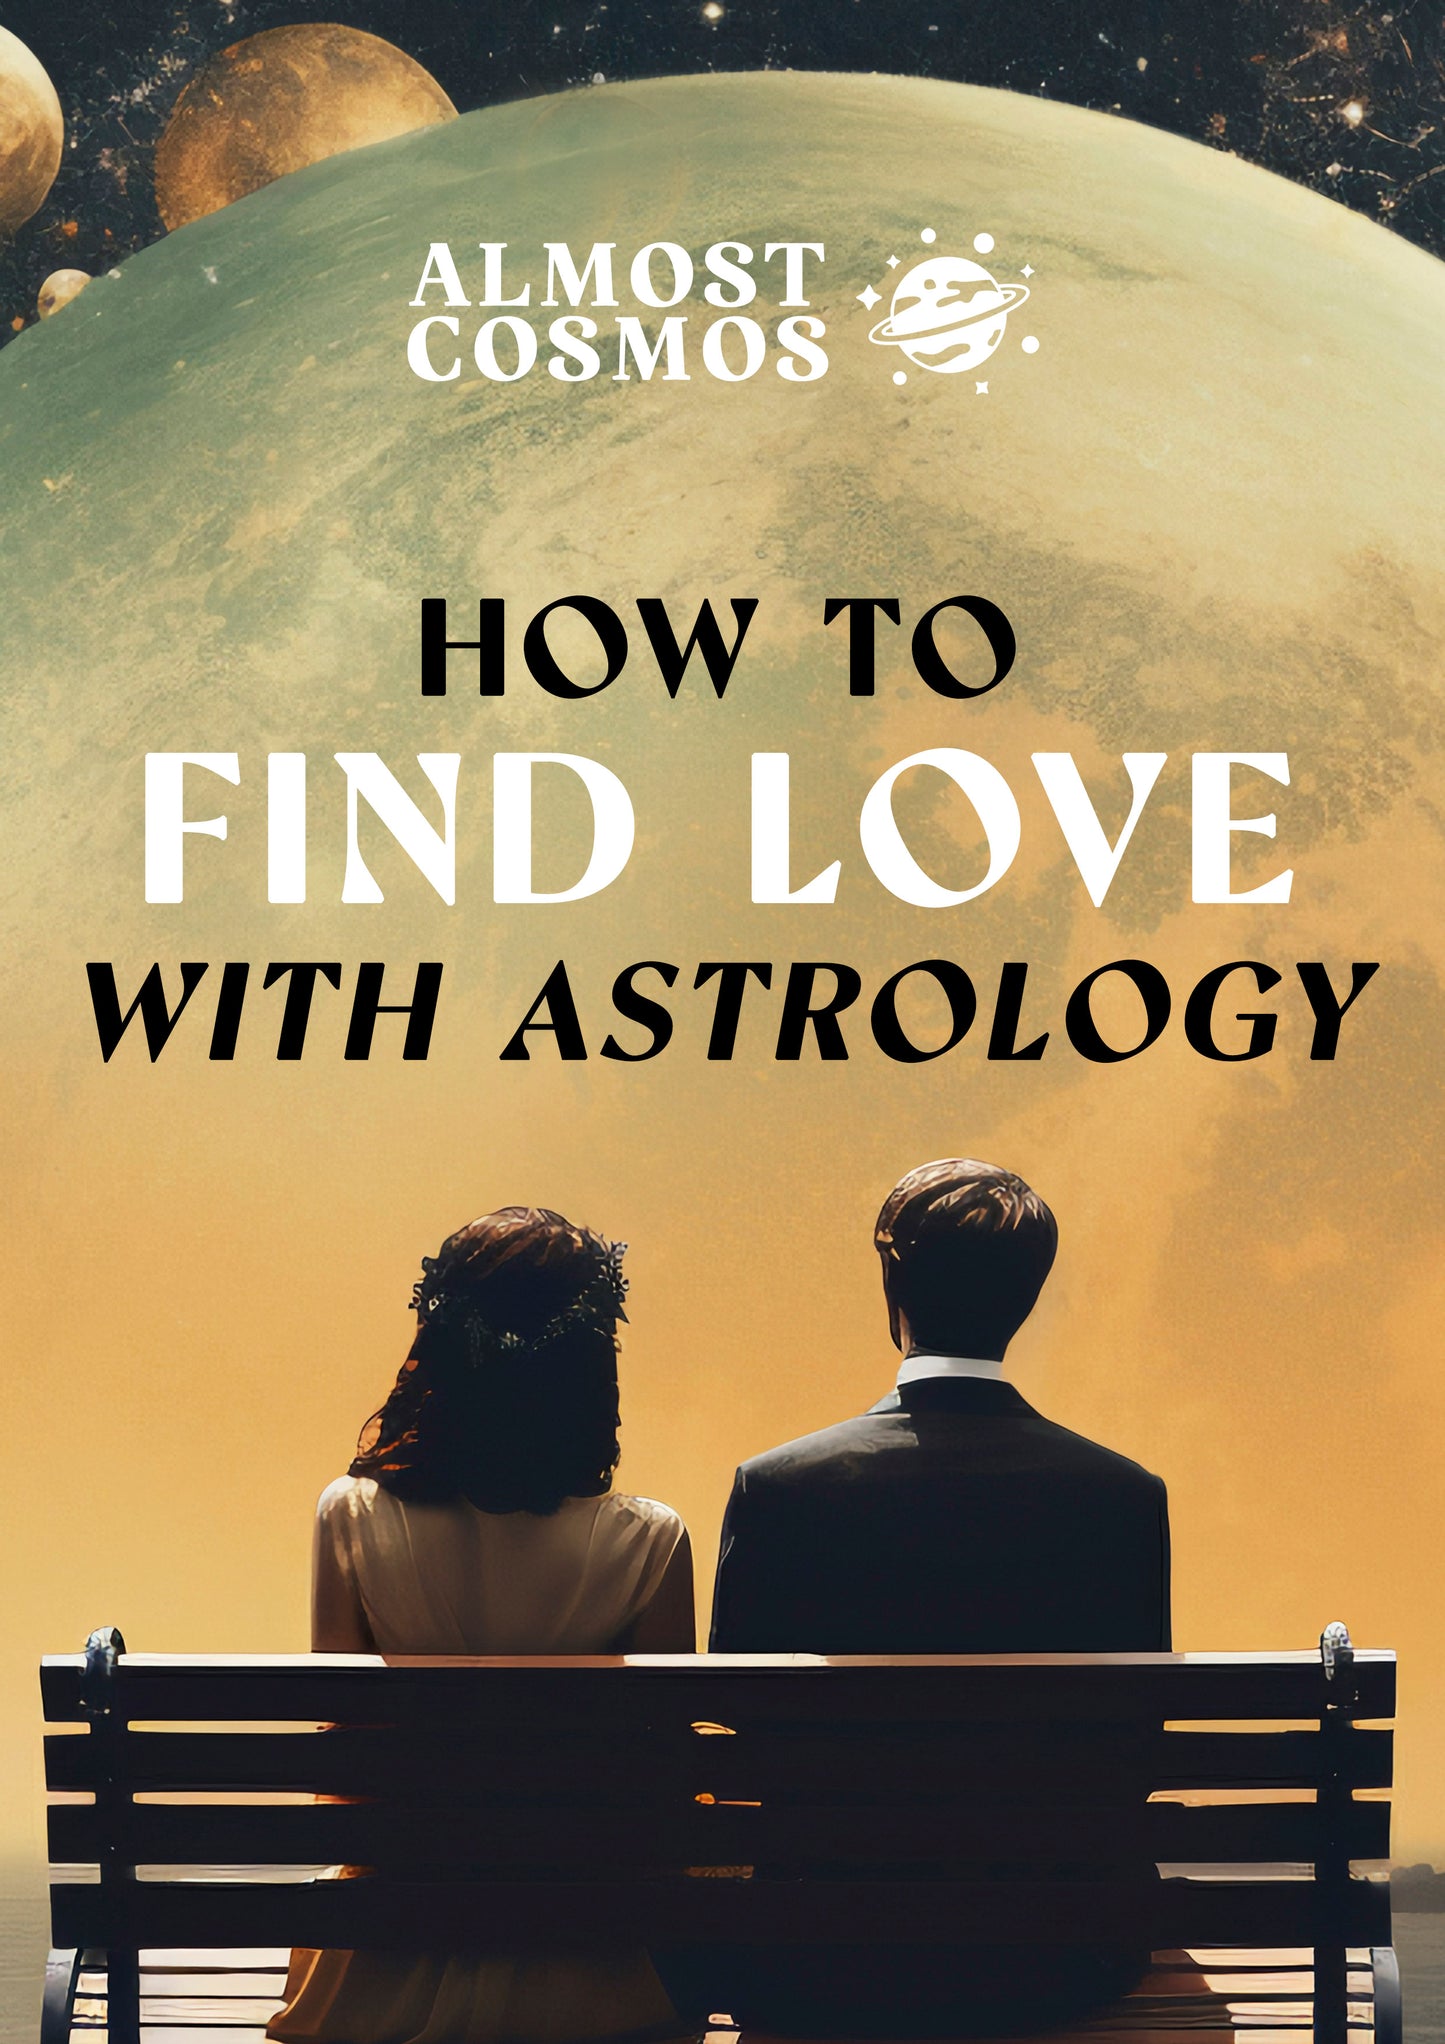 Find Love With Astrology Guide (Free)